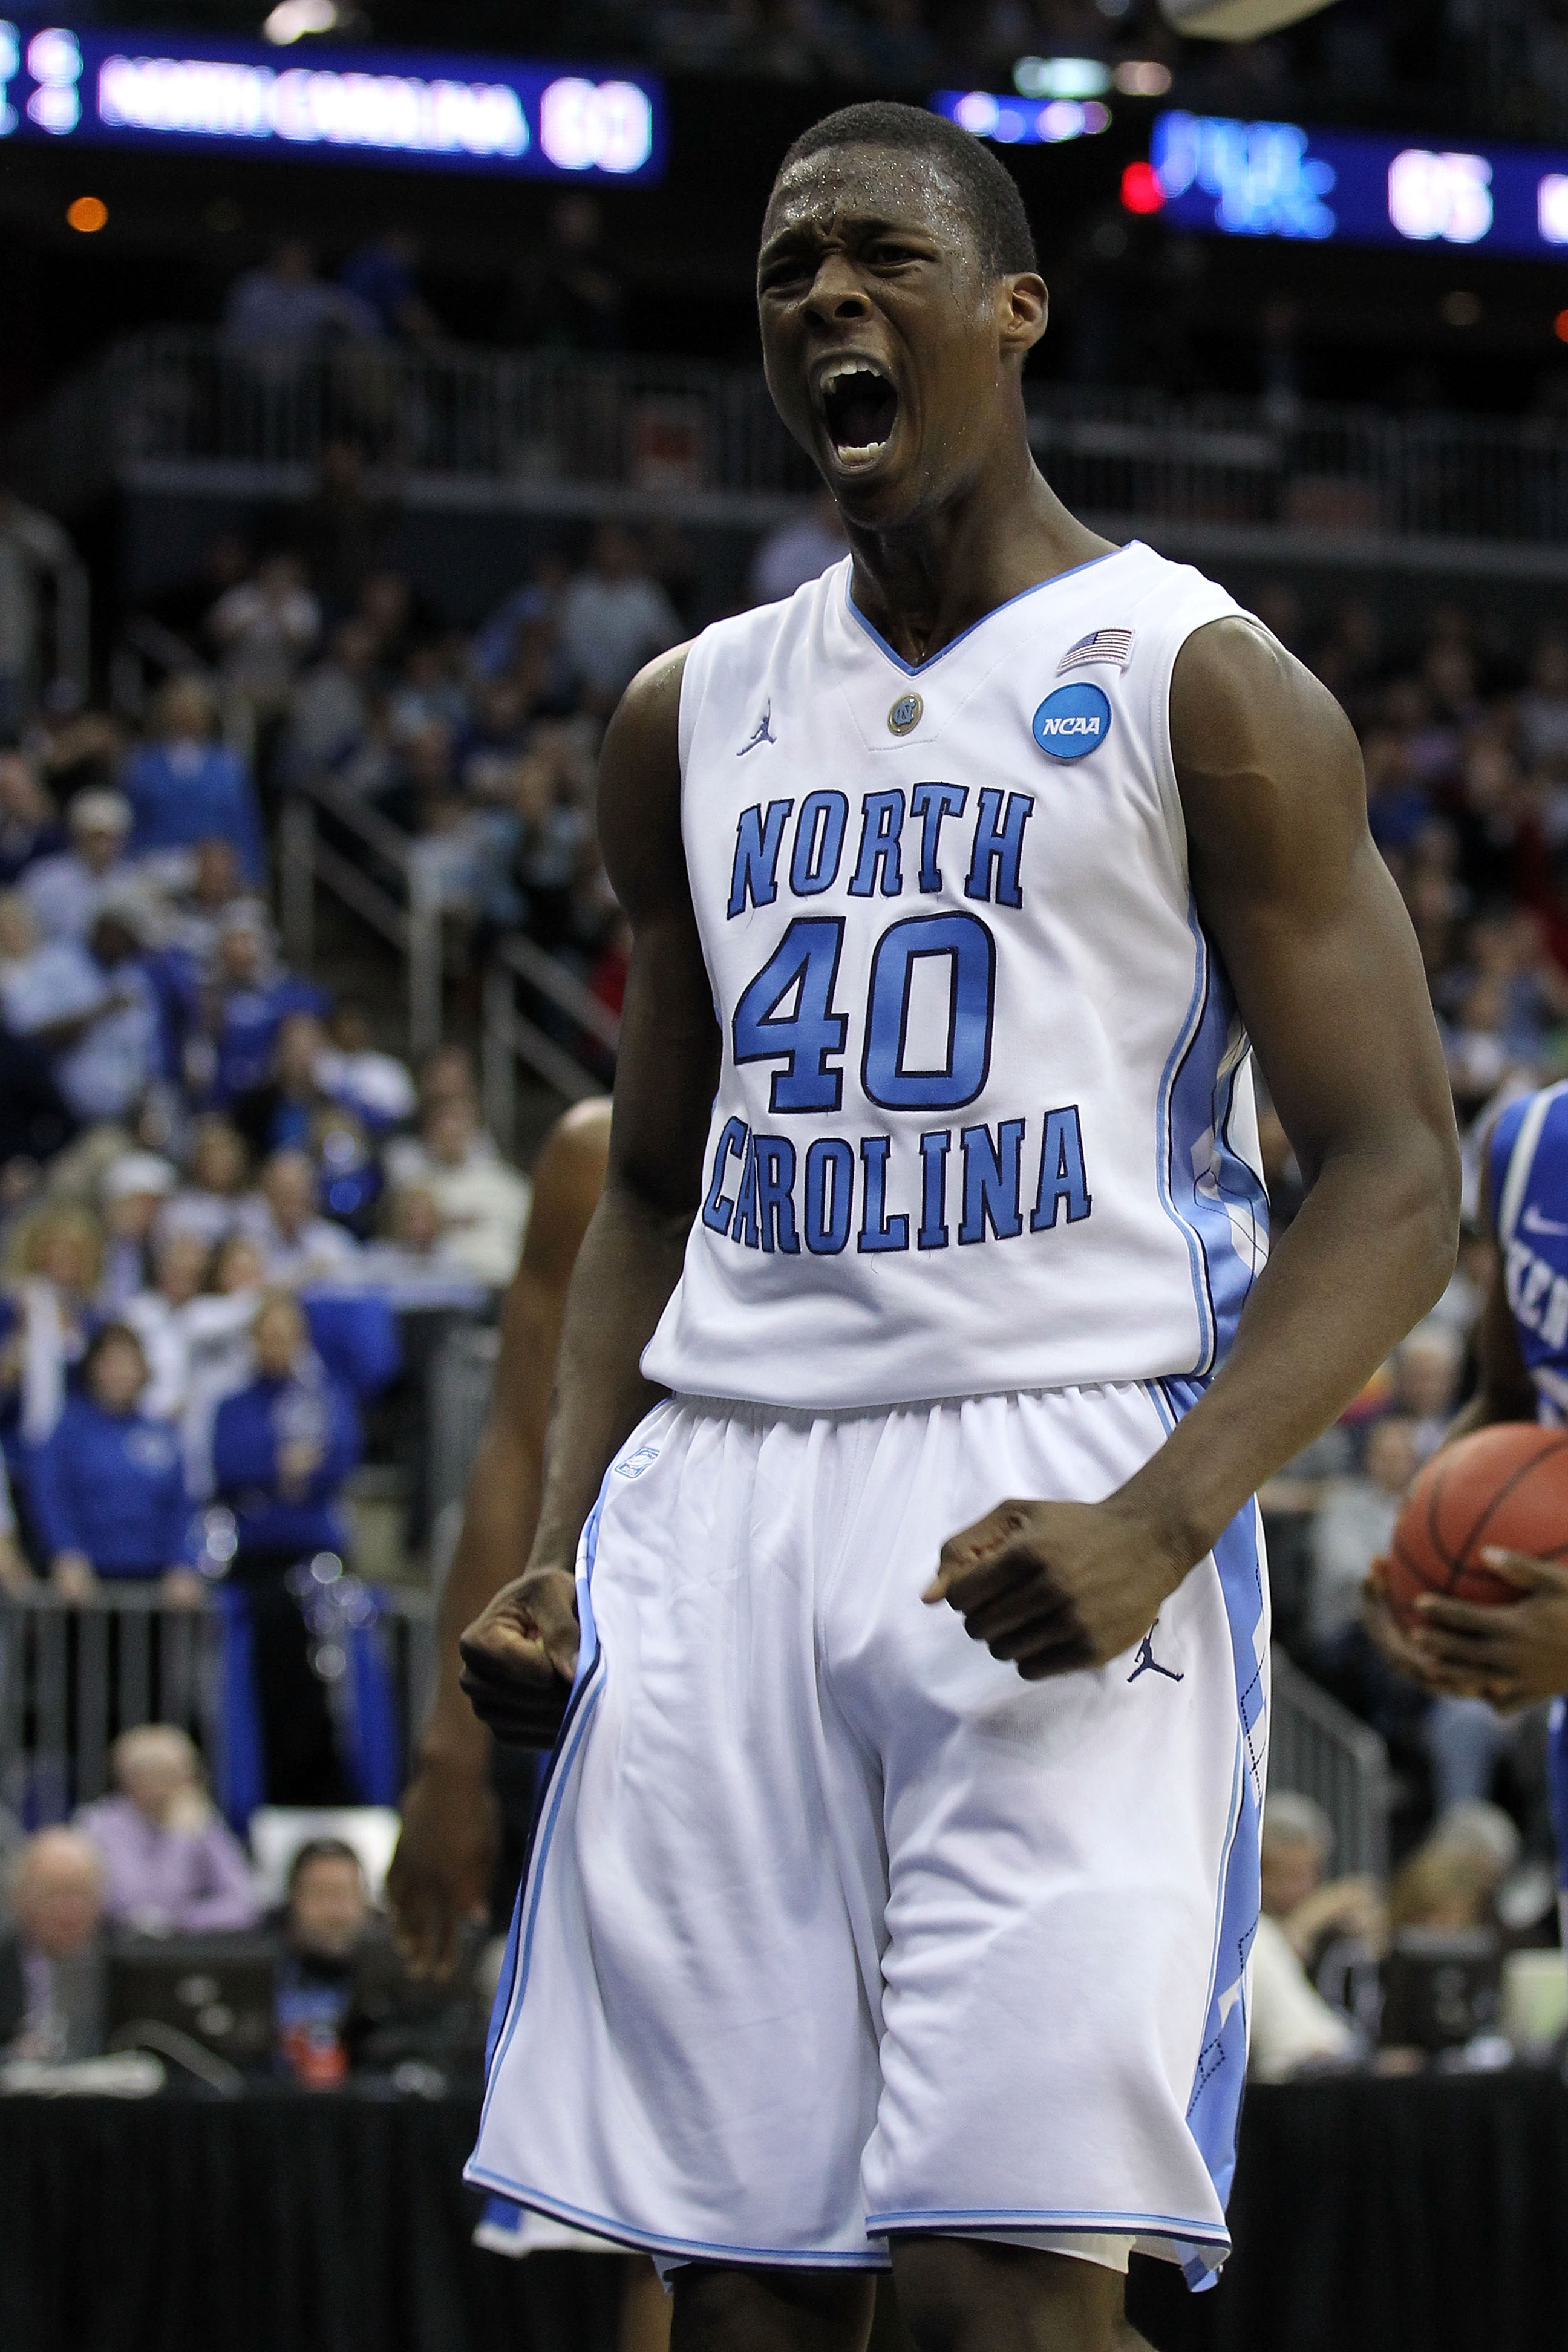 NEWARK, NJ - MARCH 27:  Harrison Barnes #40 of the North Carolina Tar Heels reacts after a play during the second half of the game against the Kentucky Wildcats in the east regional final of the 2011 NCAA men's basketball tournament at Prudential Center o